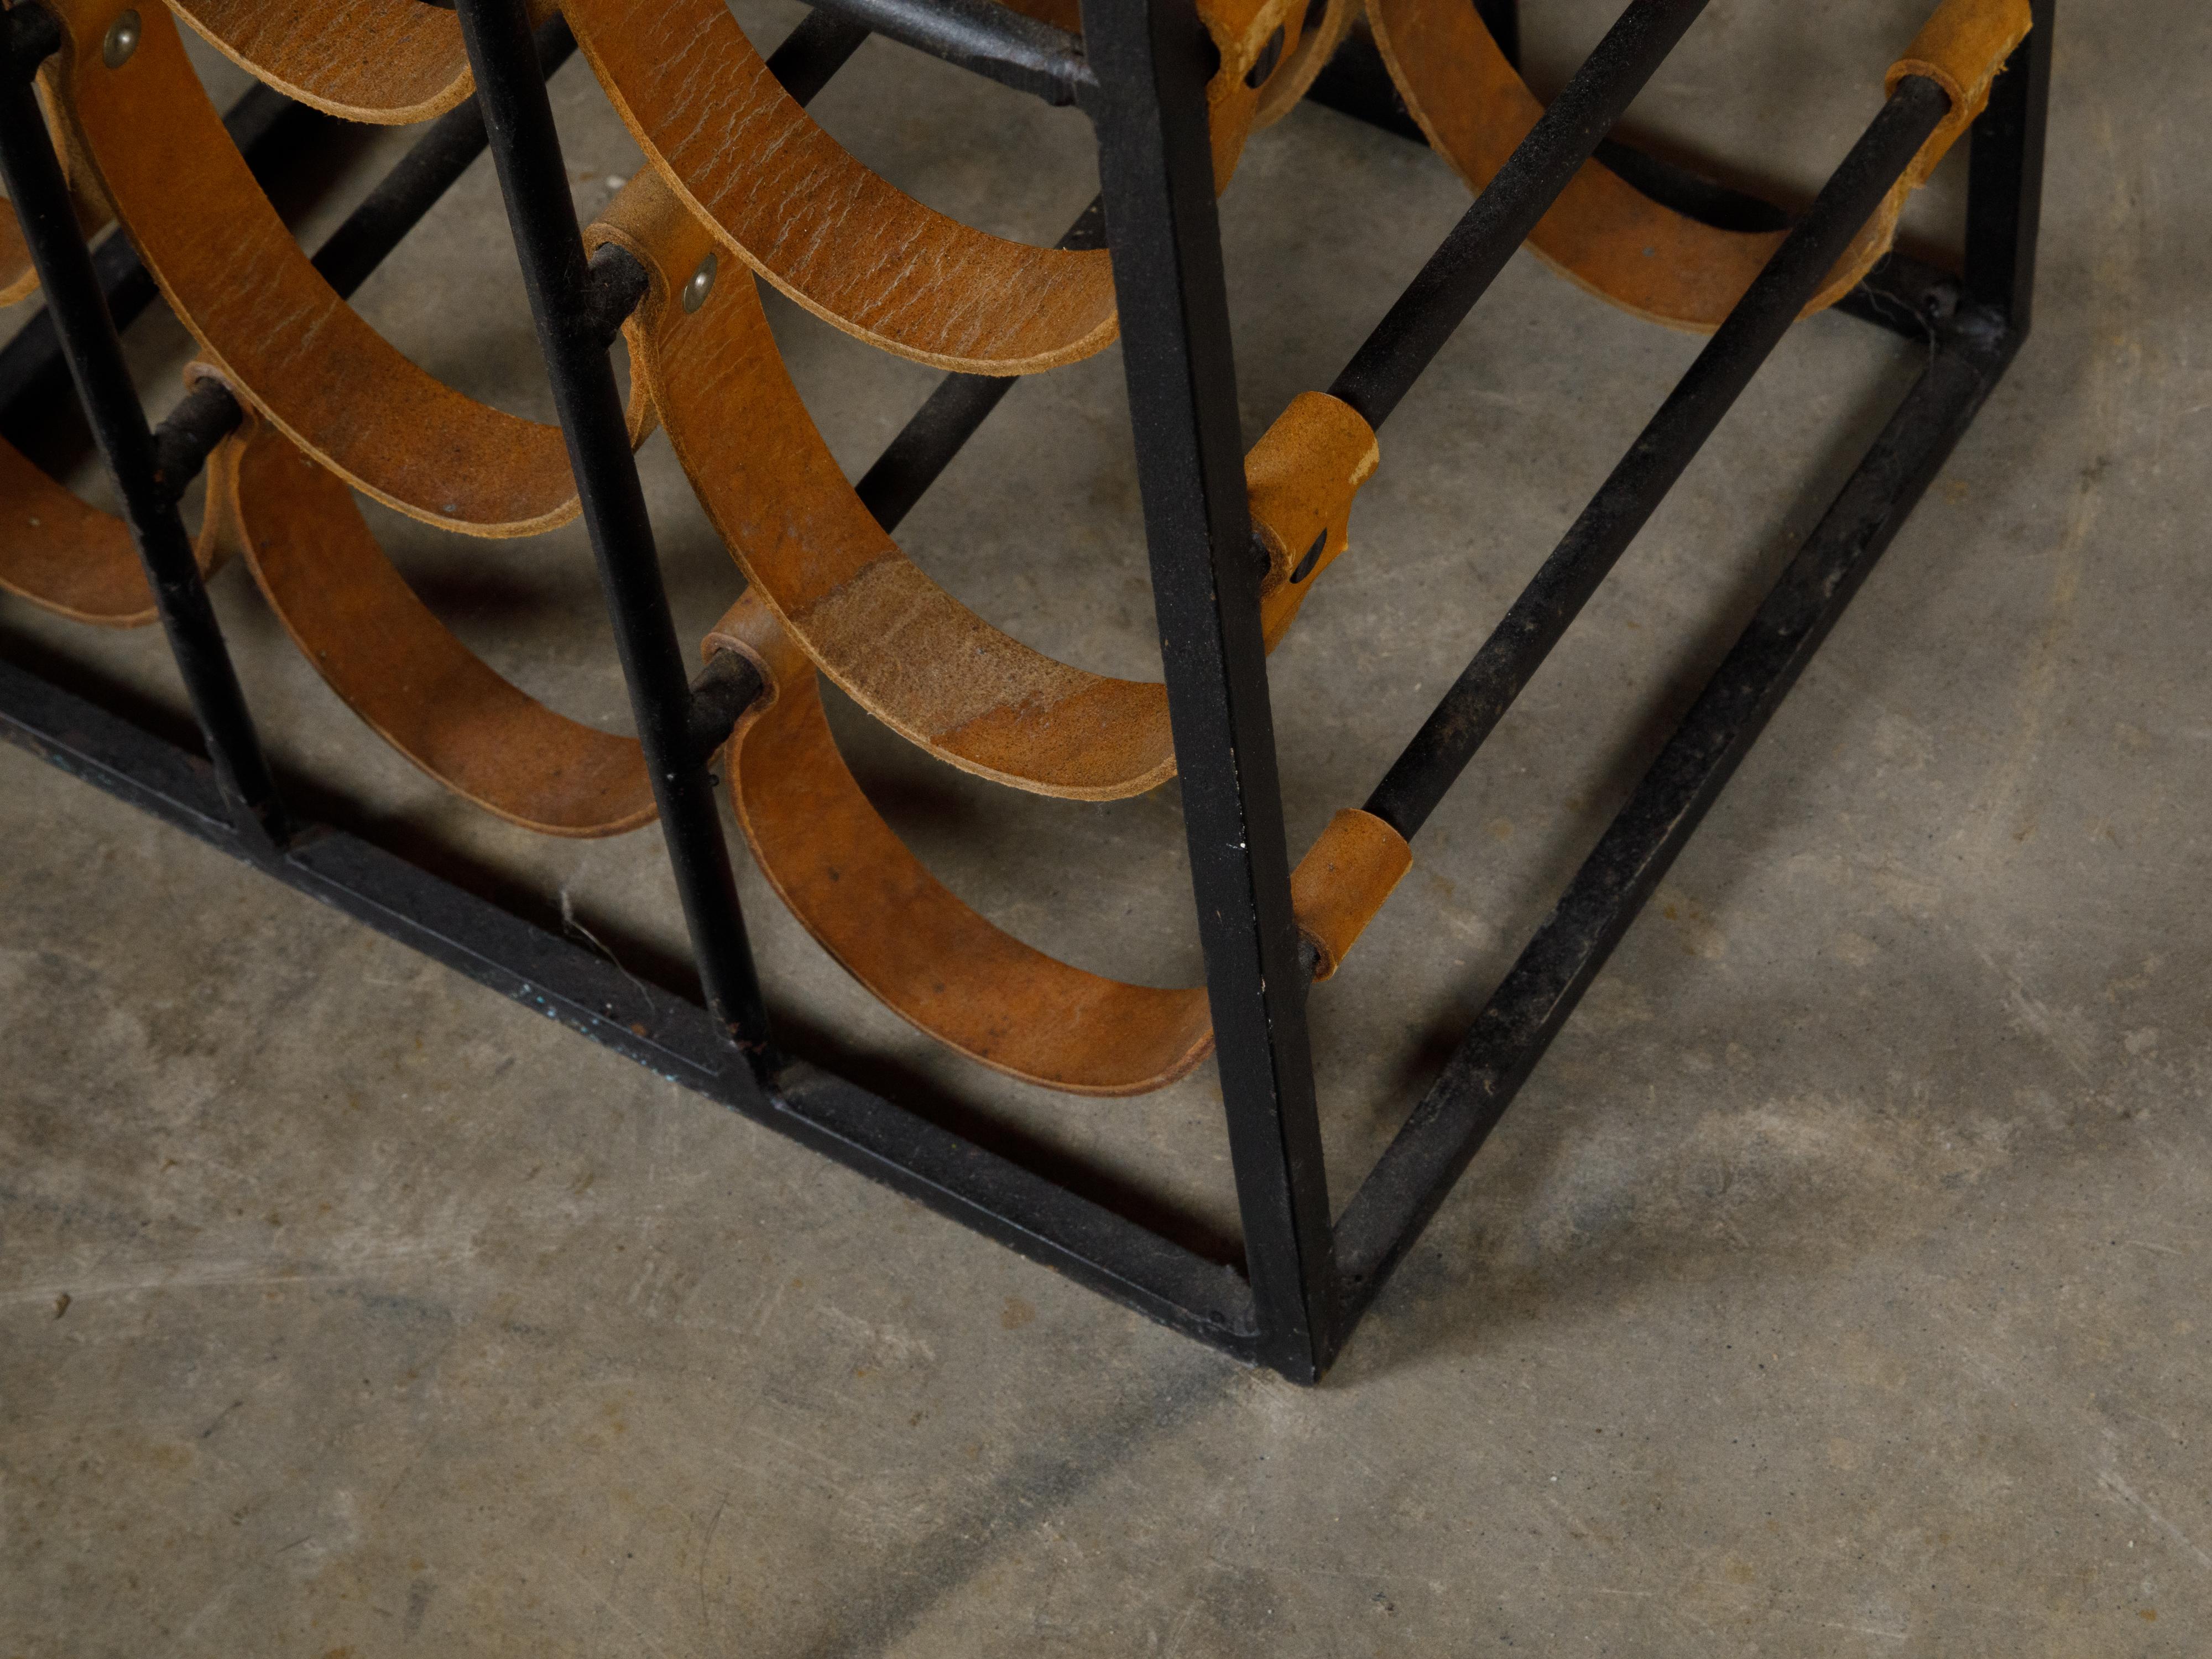 Midcentury Tall and Narrow Iron Wine Rack with Leather Straps For Sale 2